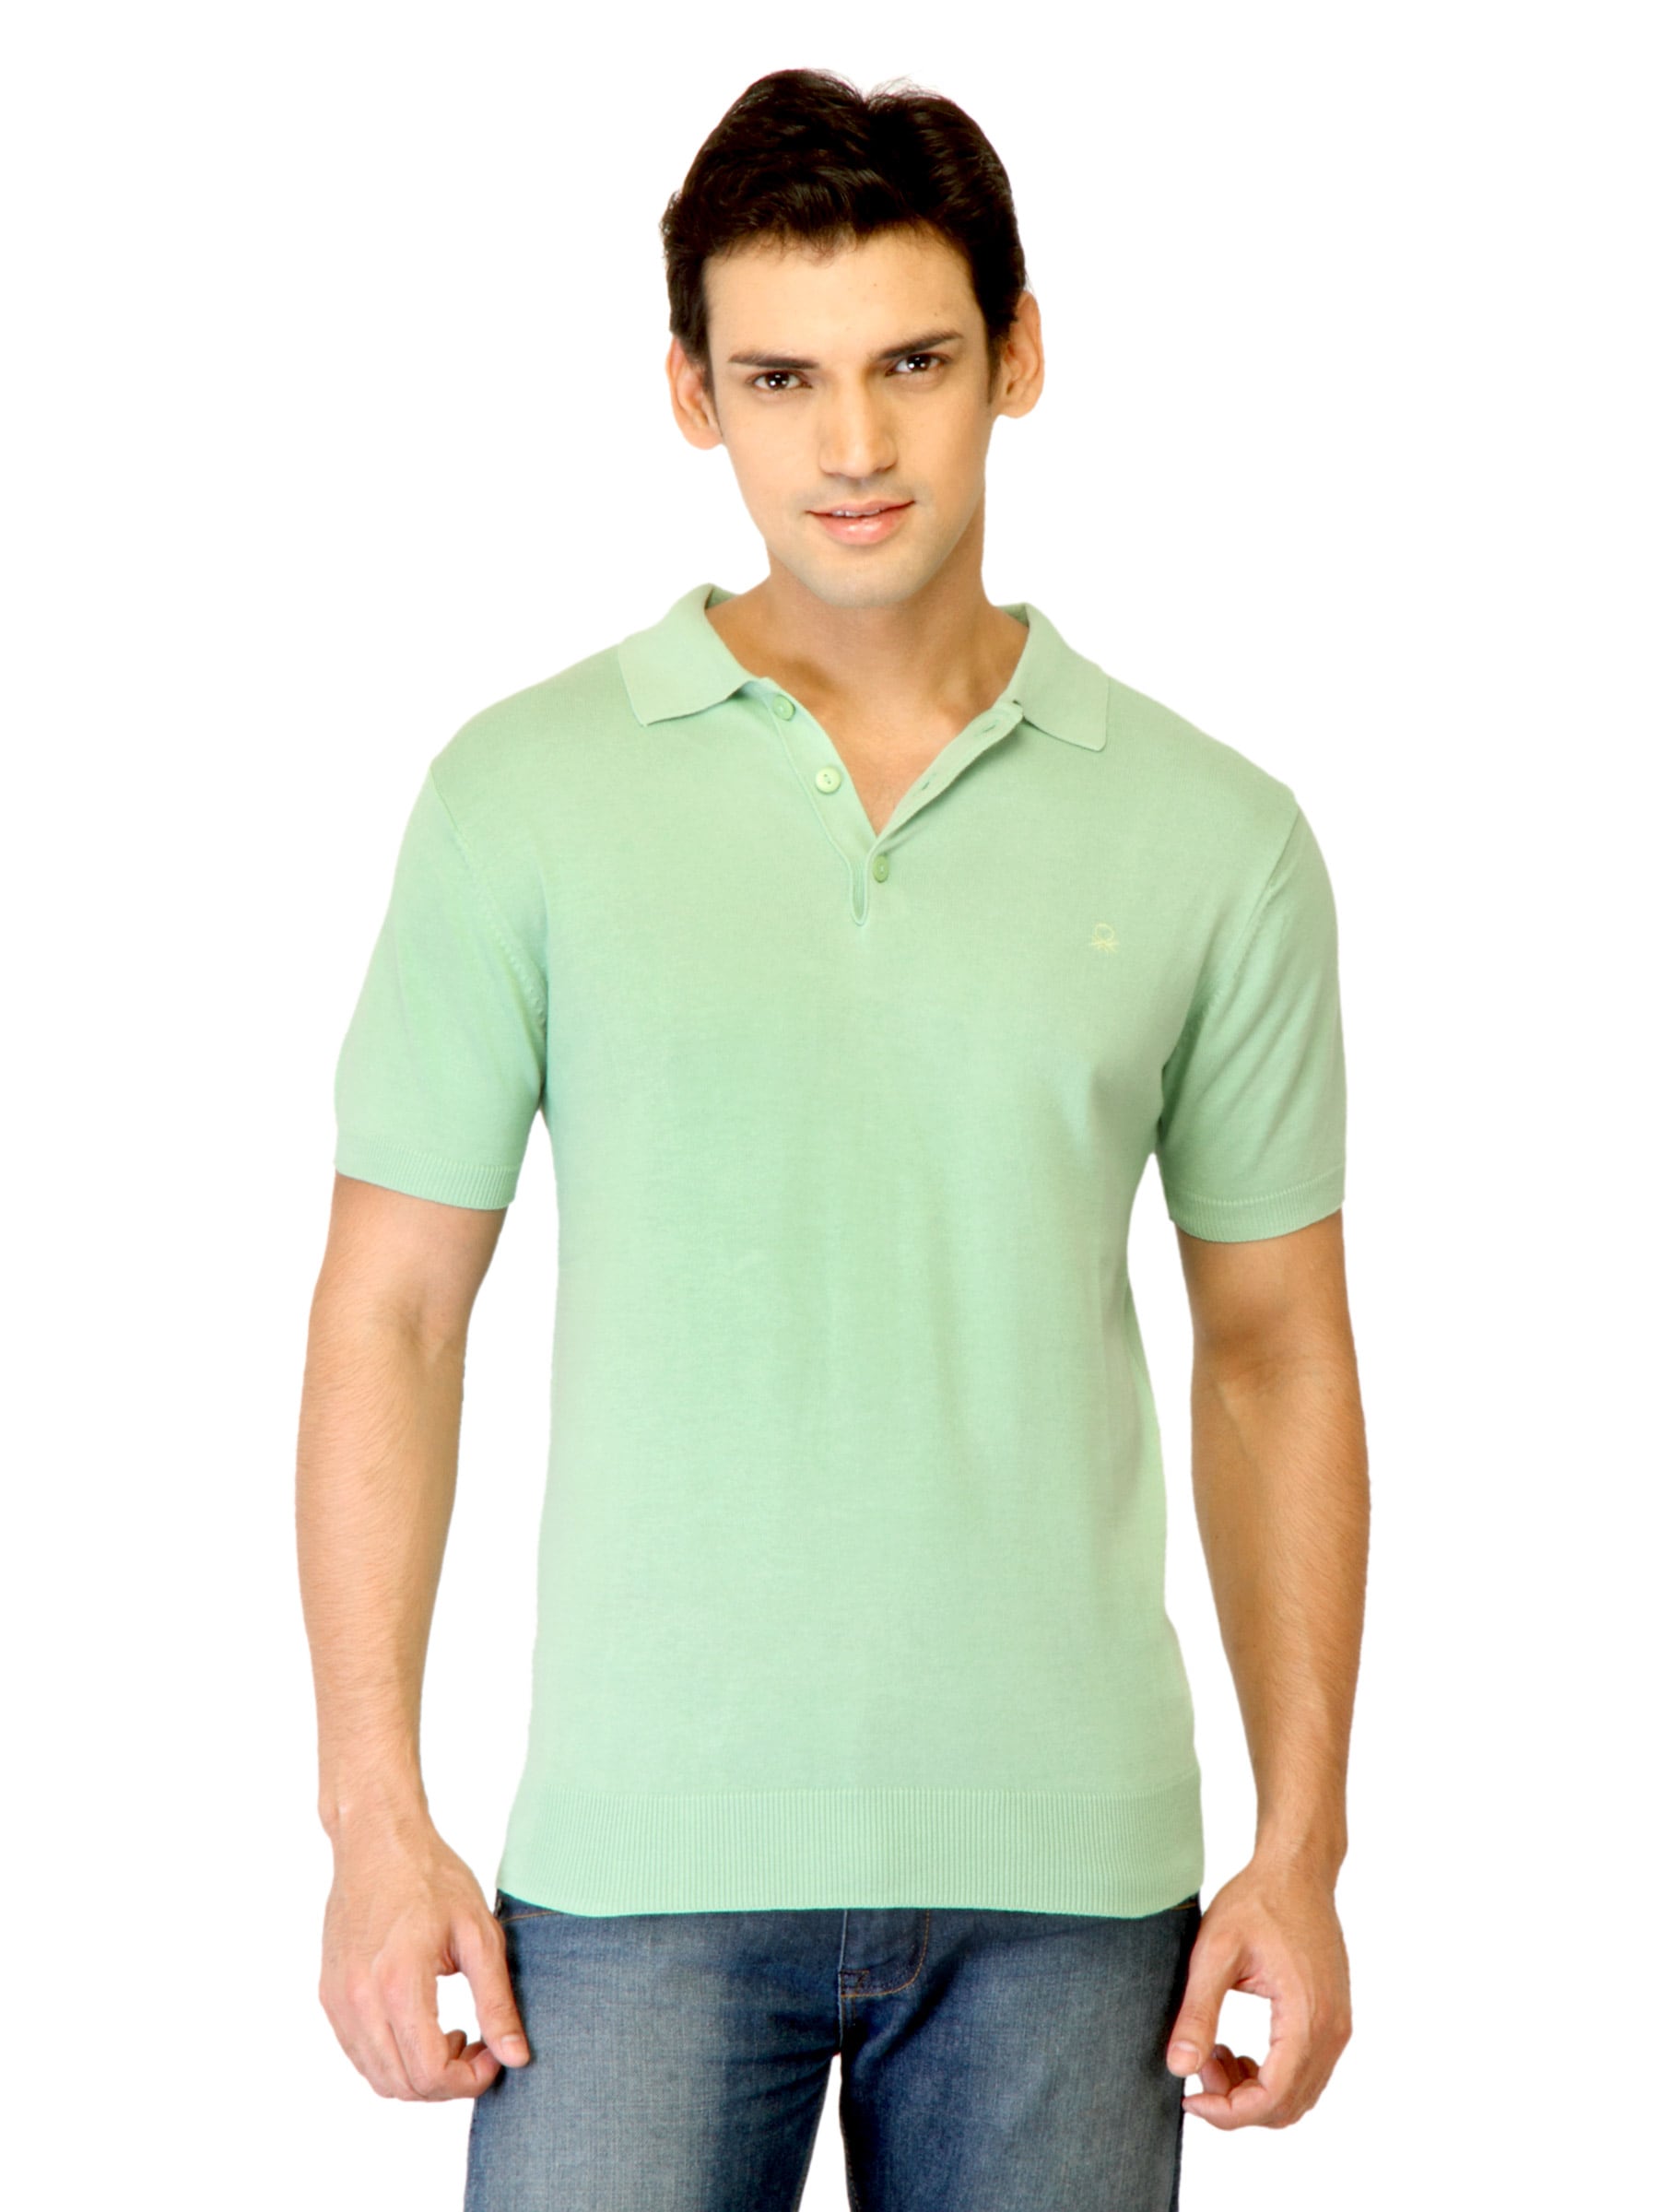 United Colors of Benetton Men Solid Green Polo T-shirts